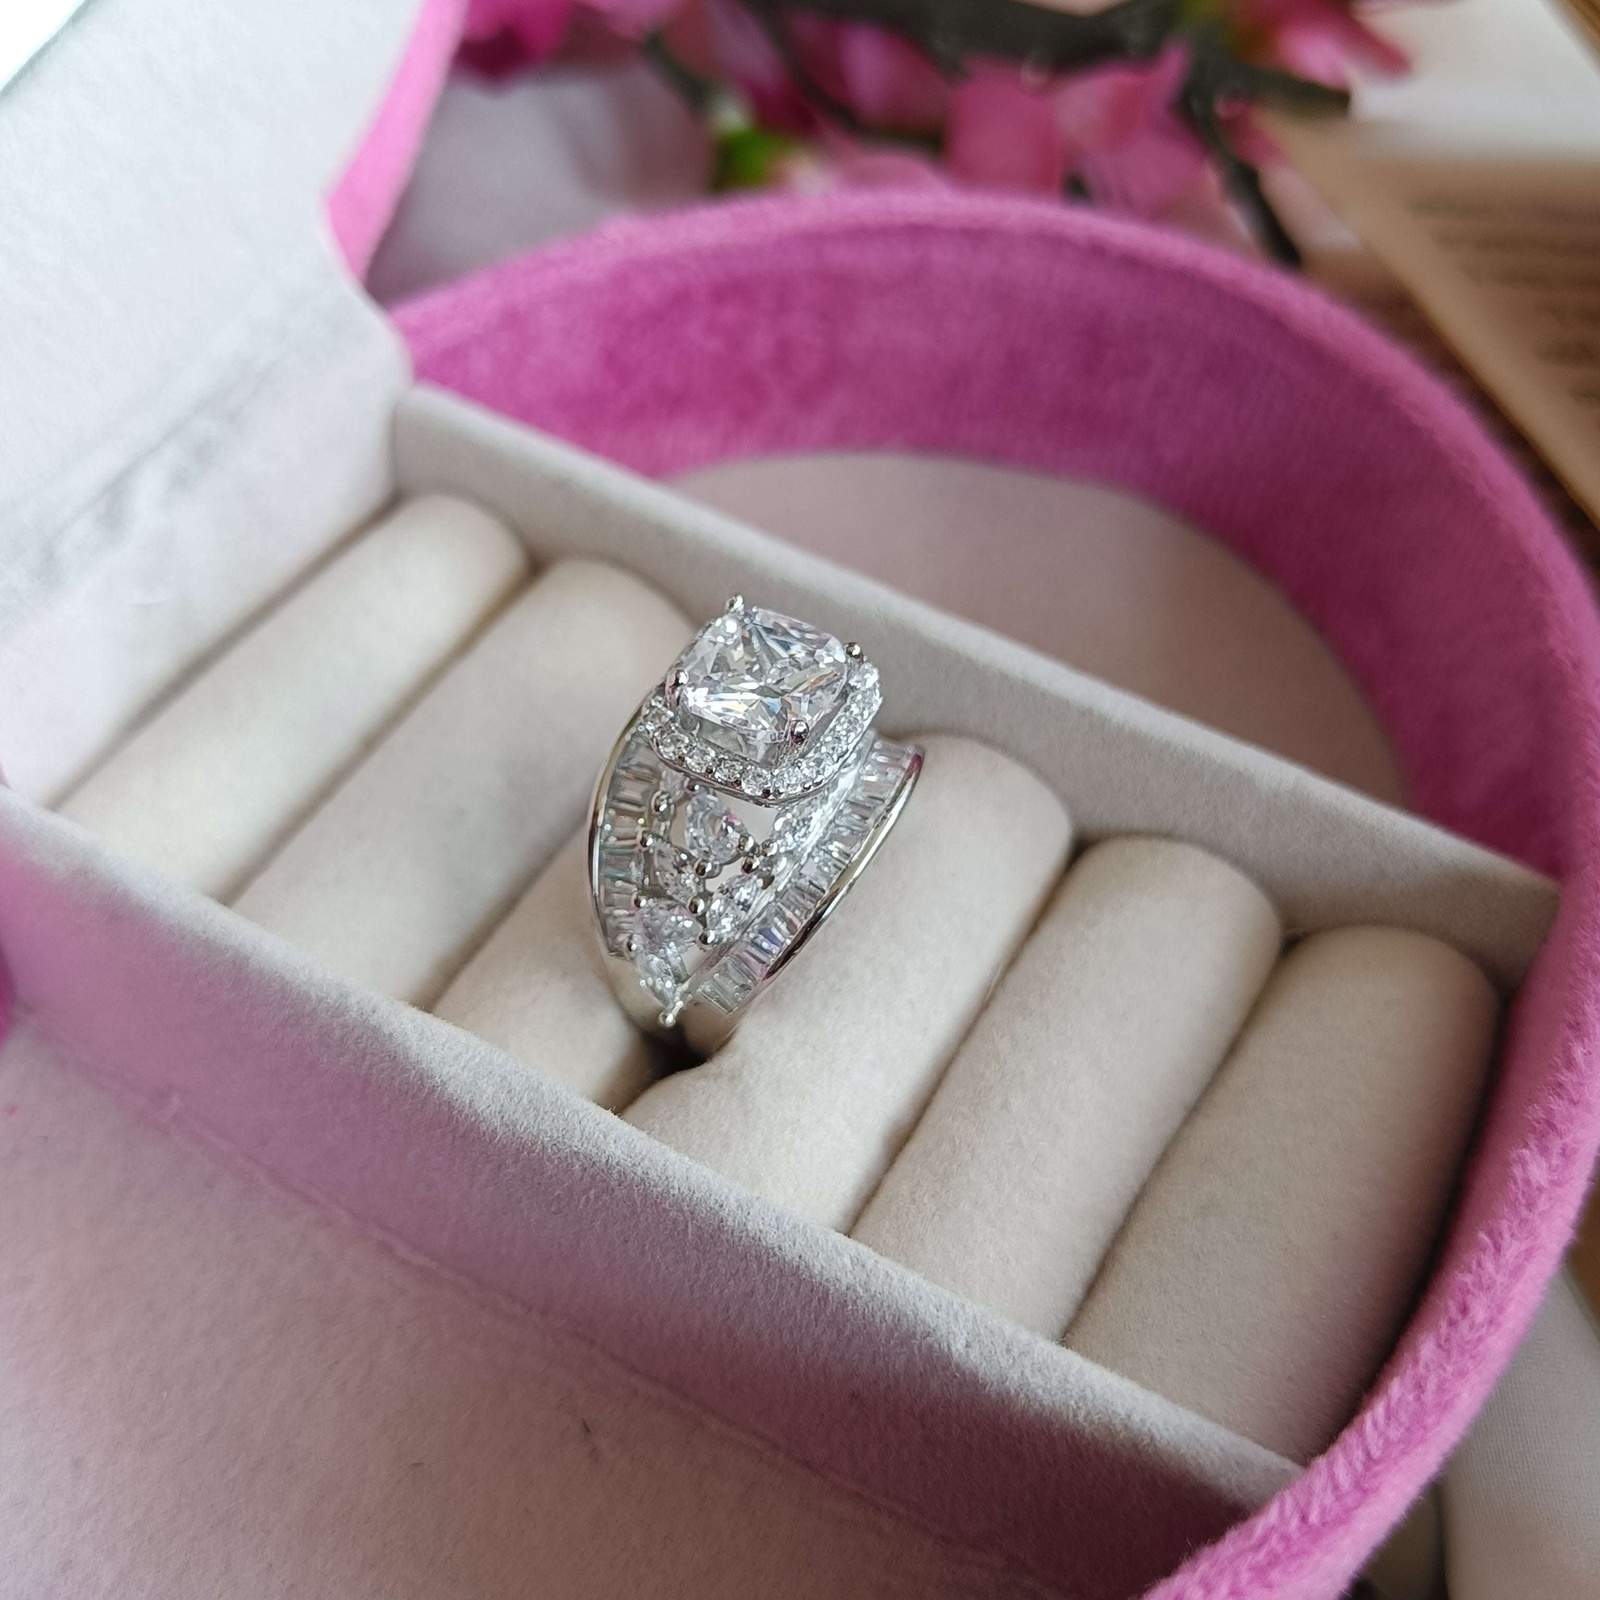 Vs sterling silver cocktail ring 097